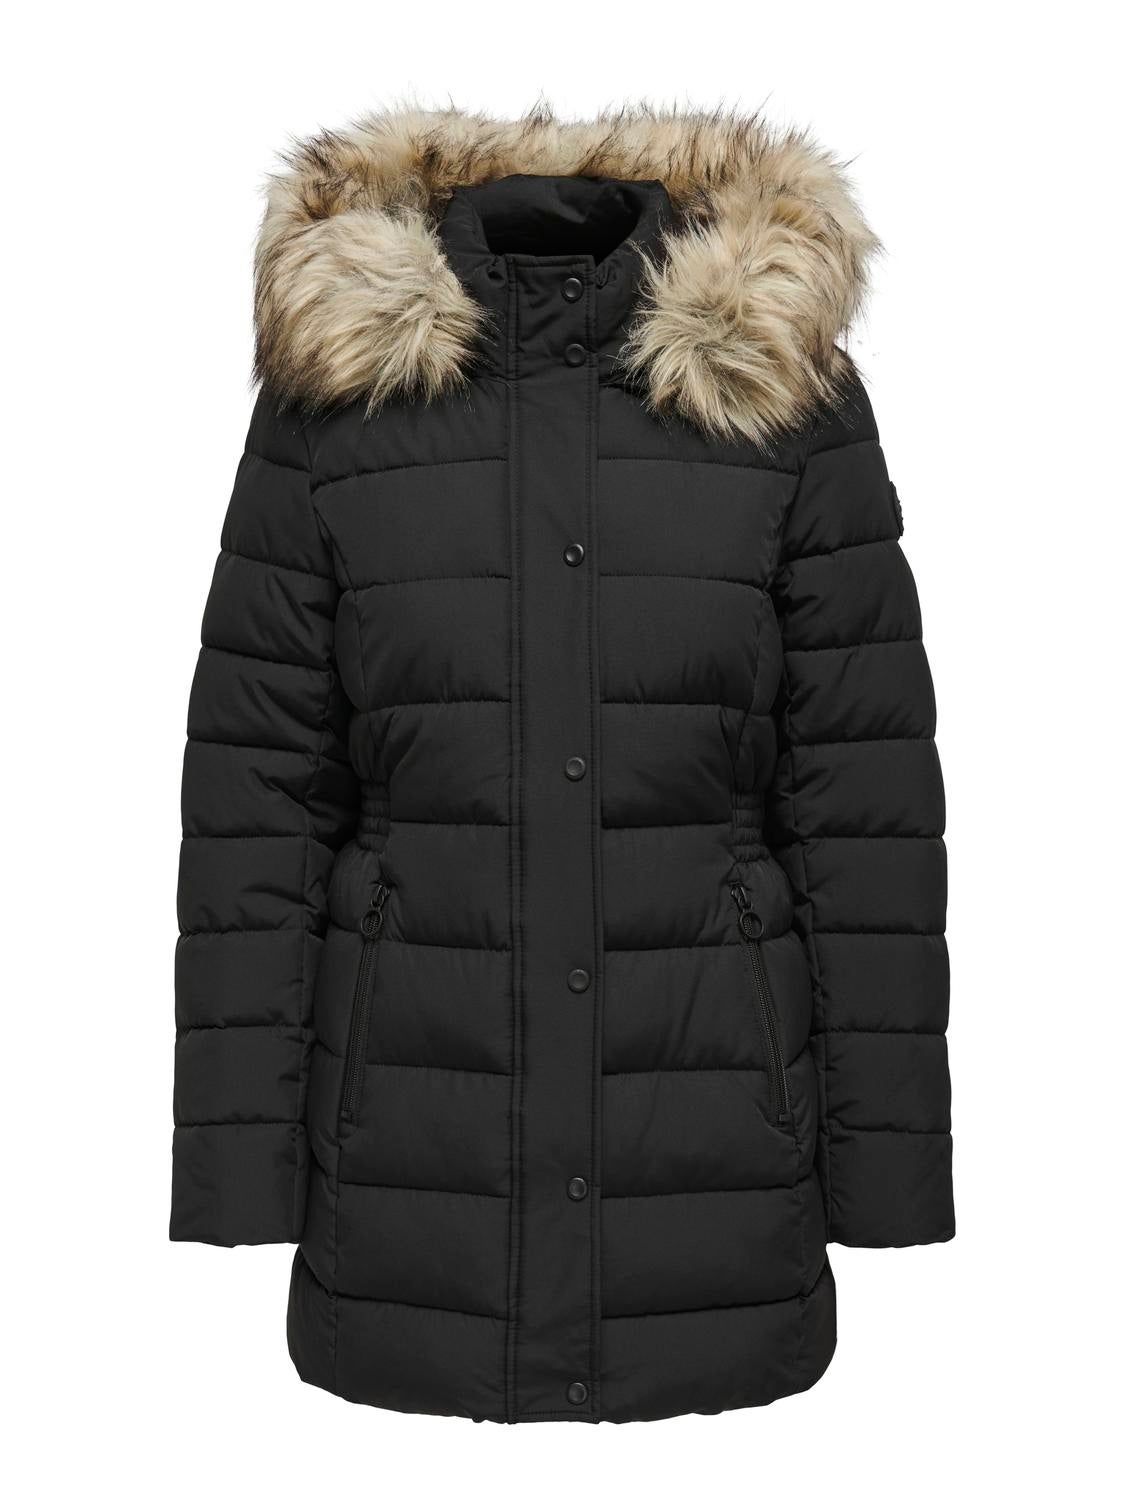 Hood with detachable faux fur edge Jacket | Black | ONLY®